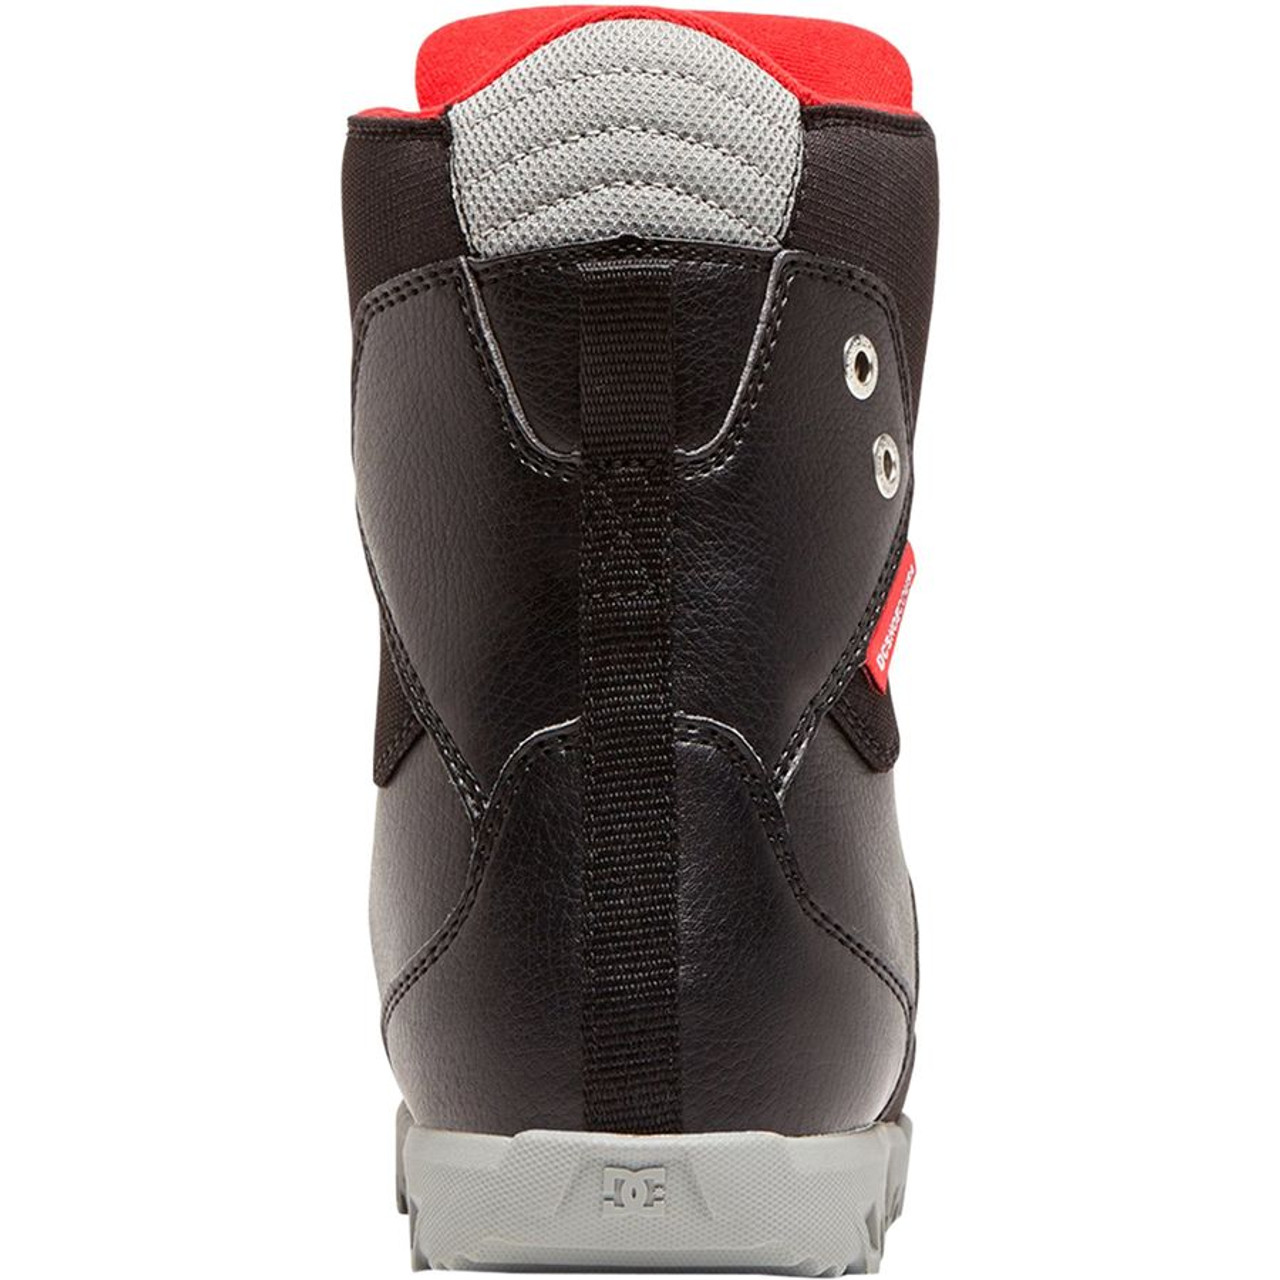 DC Scout Youth Boa Snowboard Boots 2020 Black Grey 3y